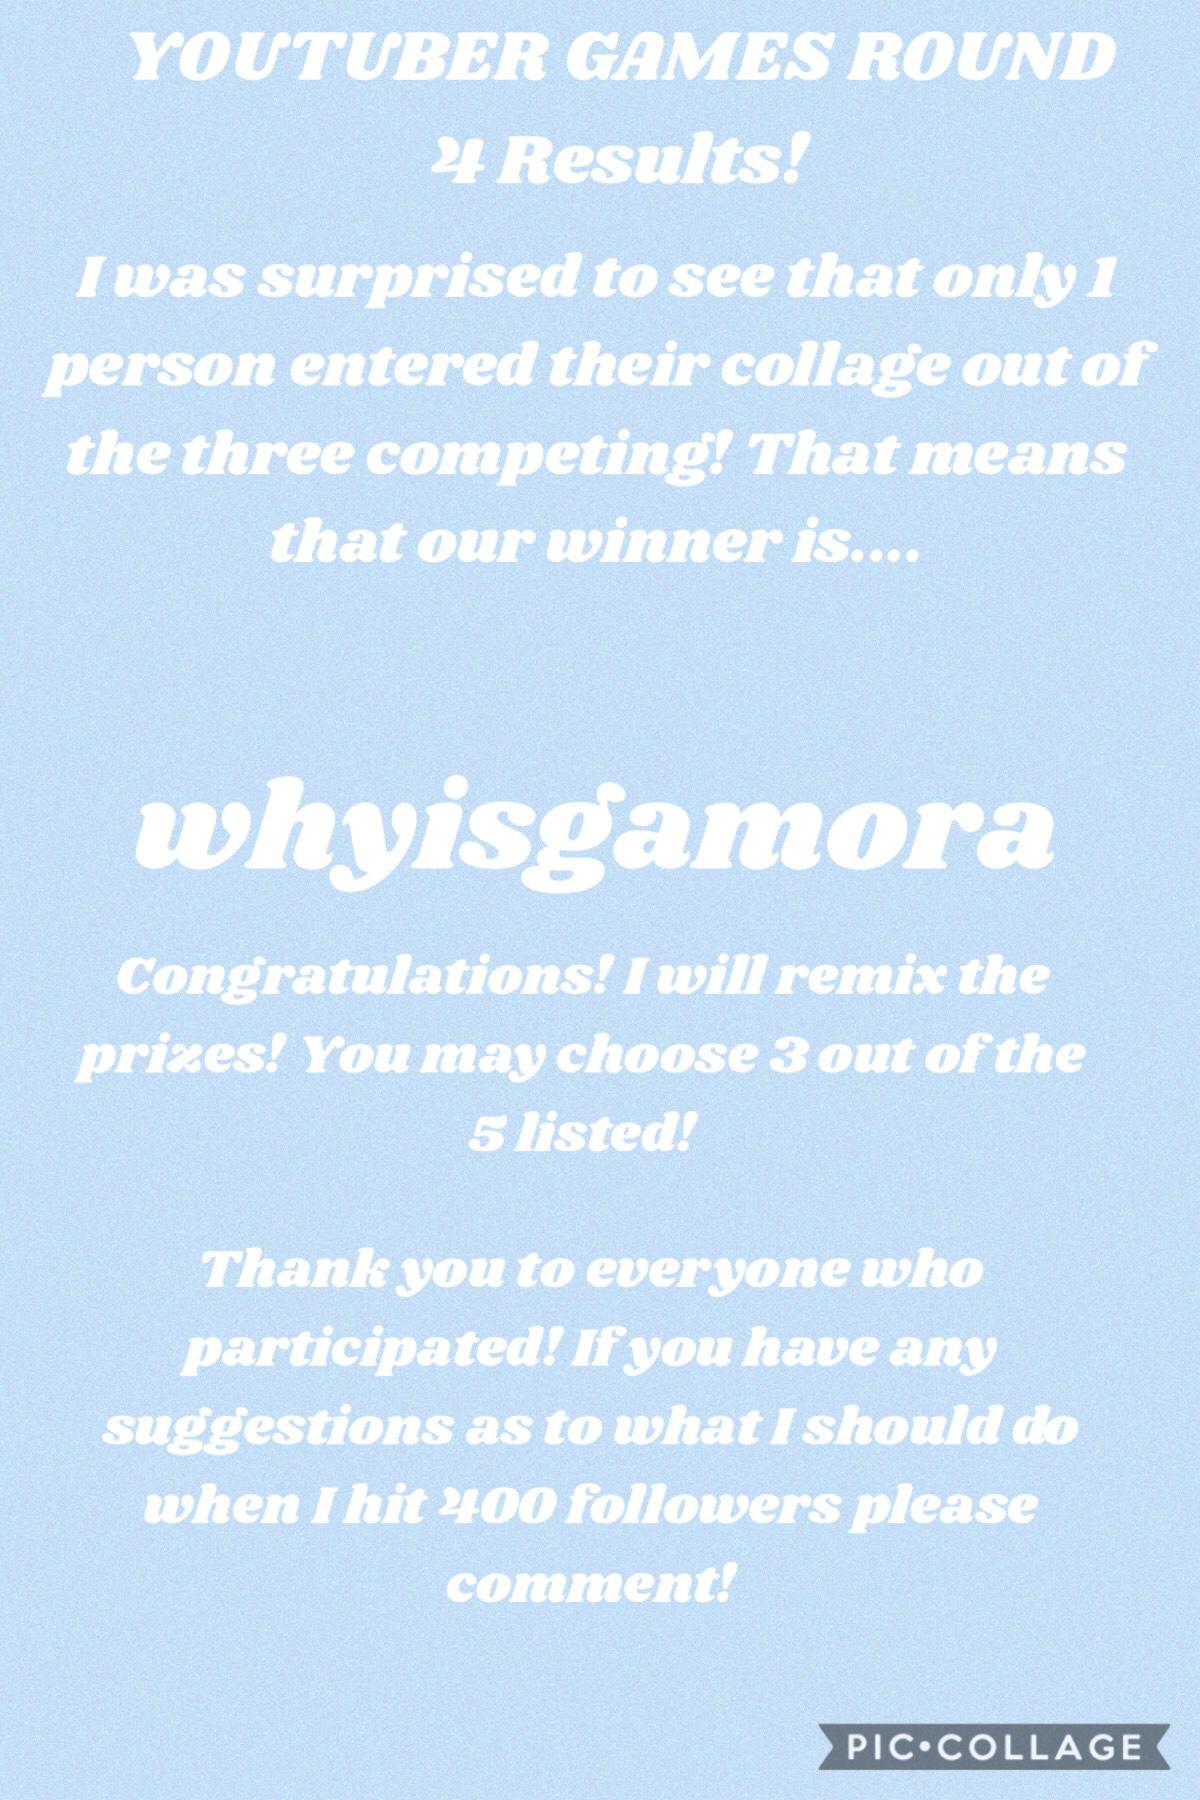 YouTuber Games Round 4 Results!
The Winner is....
whyisgamora!!!!!!!!🥁🥁💫
Congrats to you! Thanks to everyone who participated in the games!💕💜